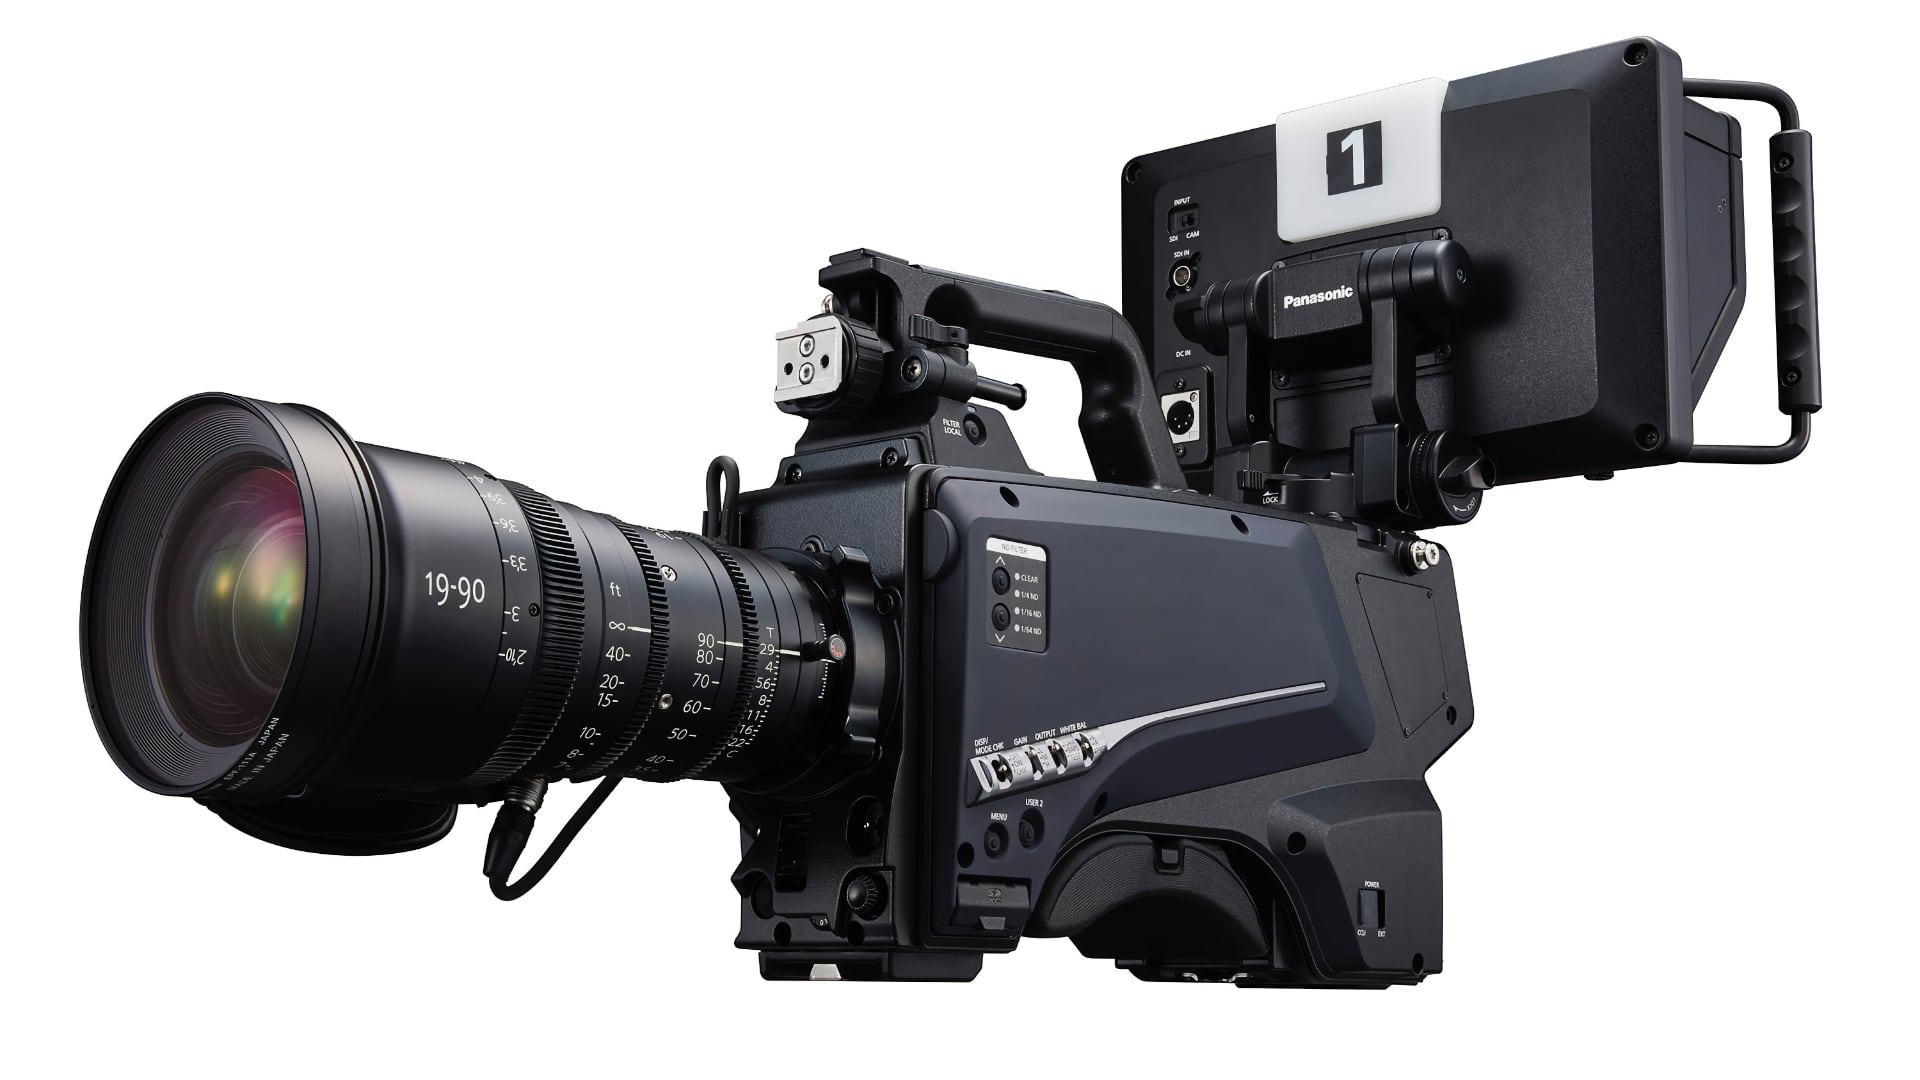 The Panasonic AK-PLV100 owes a lot to the Varicam